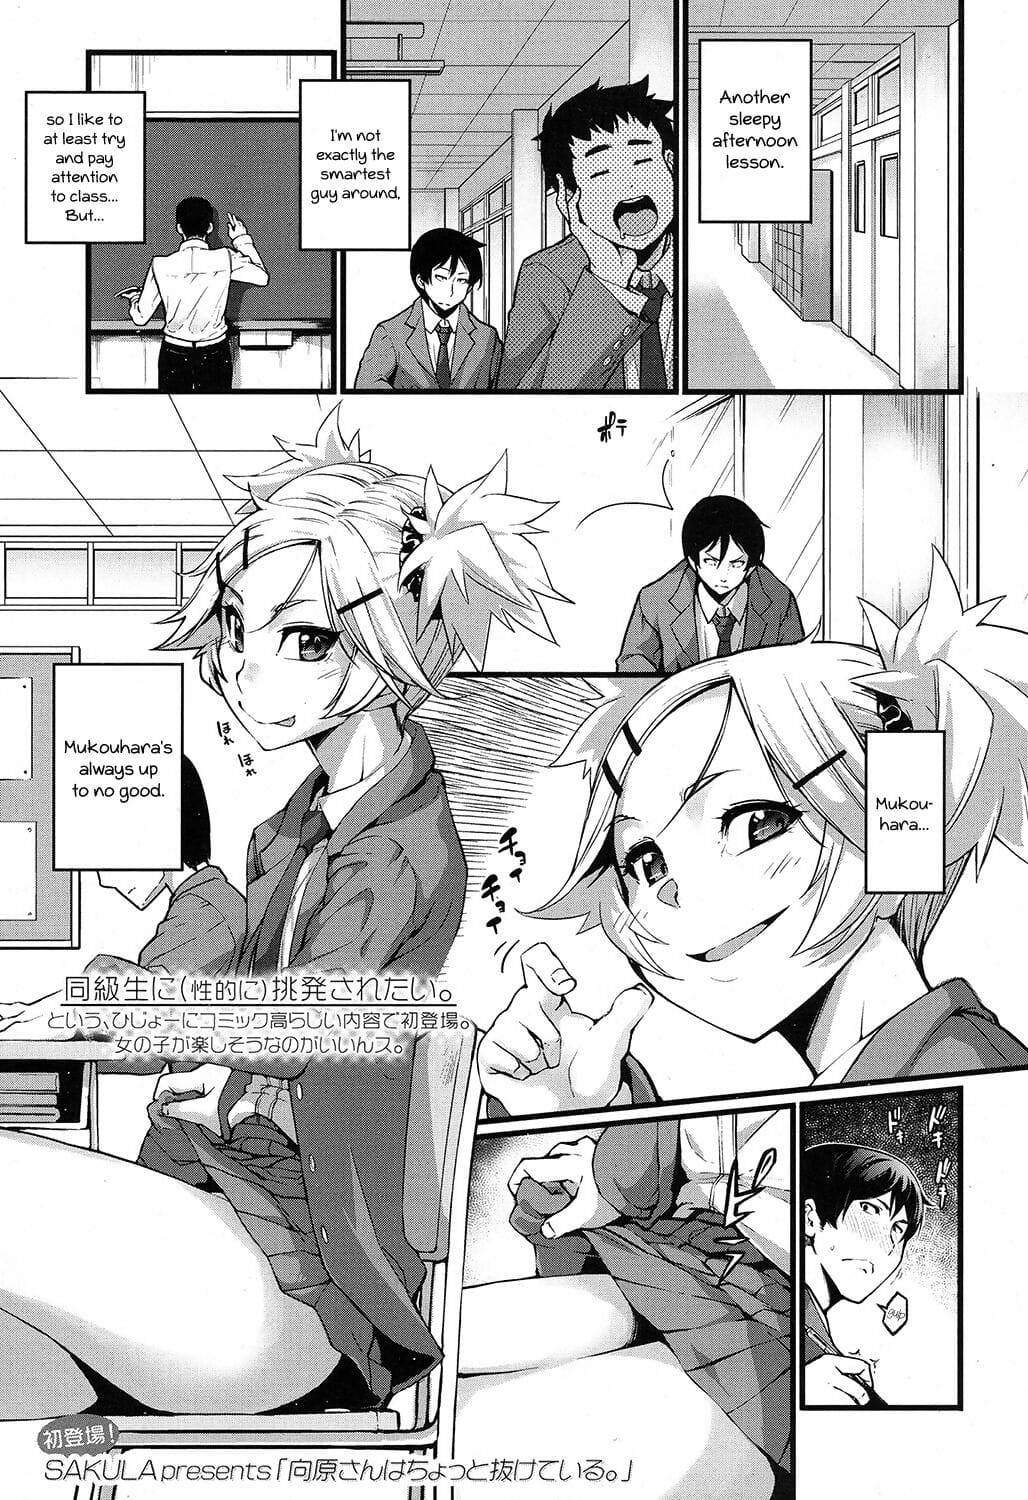 Mukouhara-san is A Little Distracting page 1